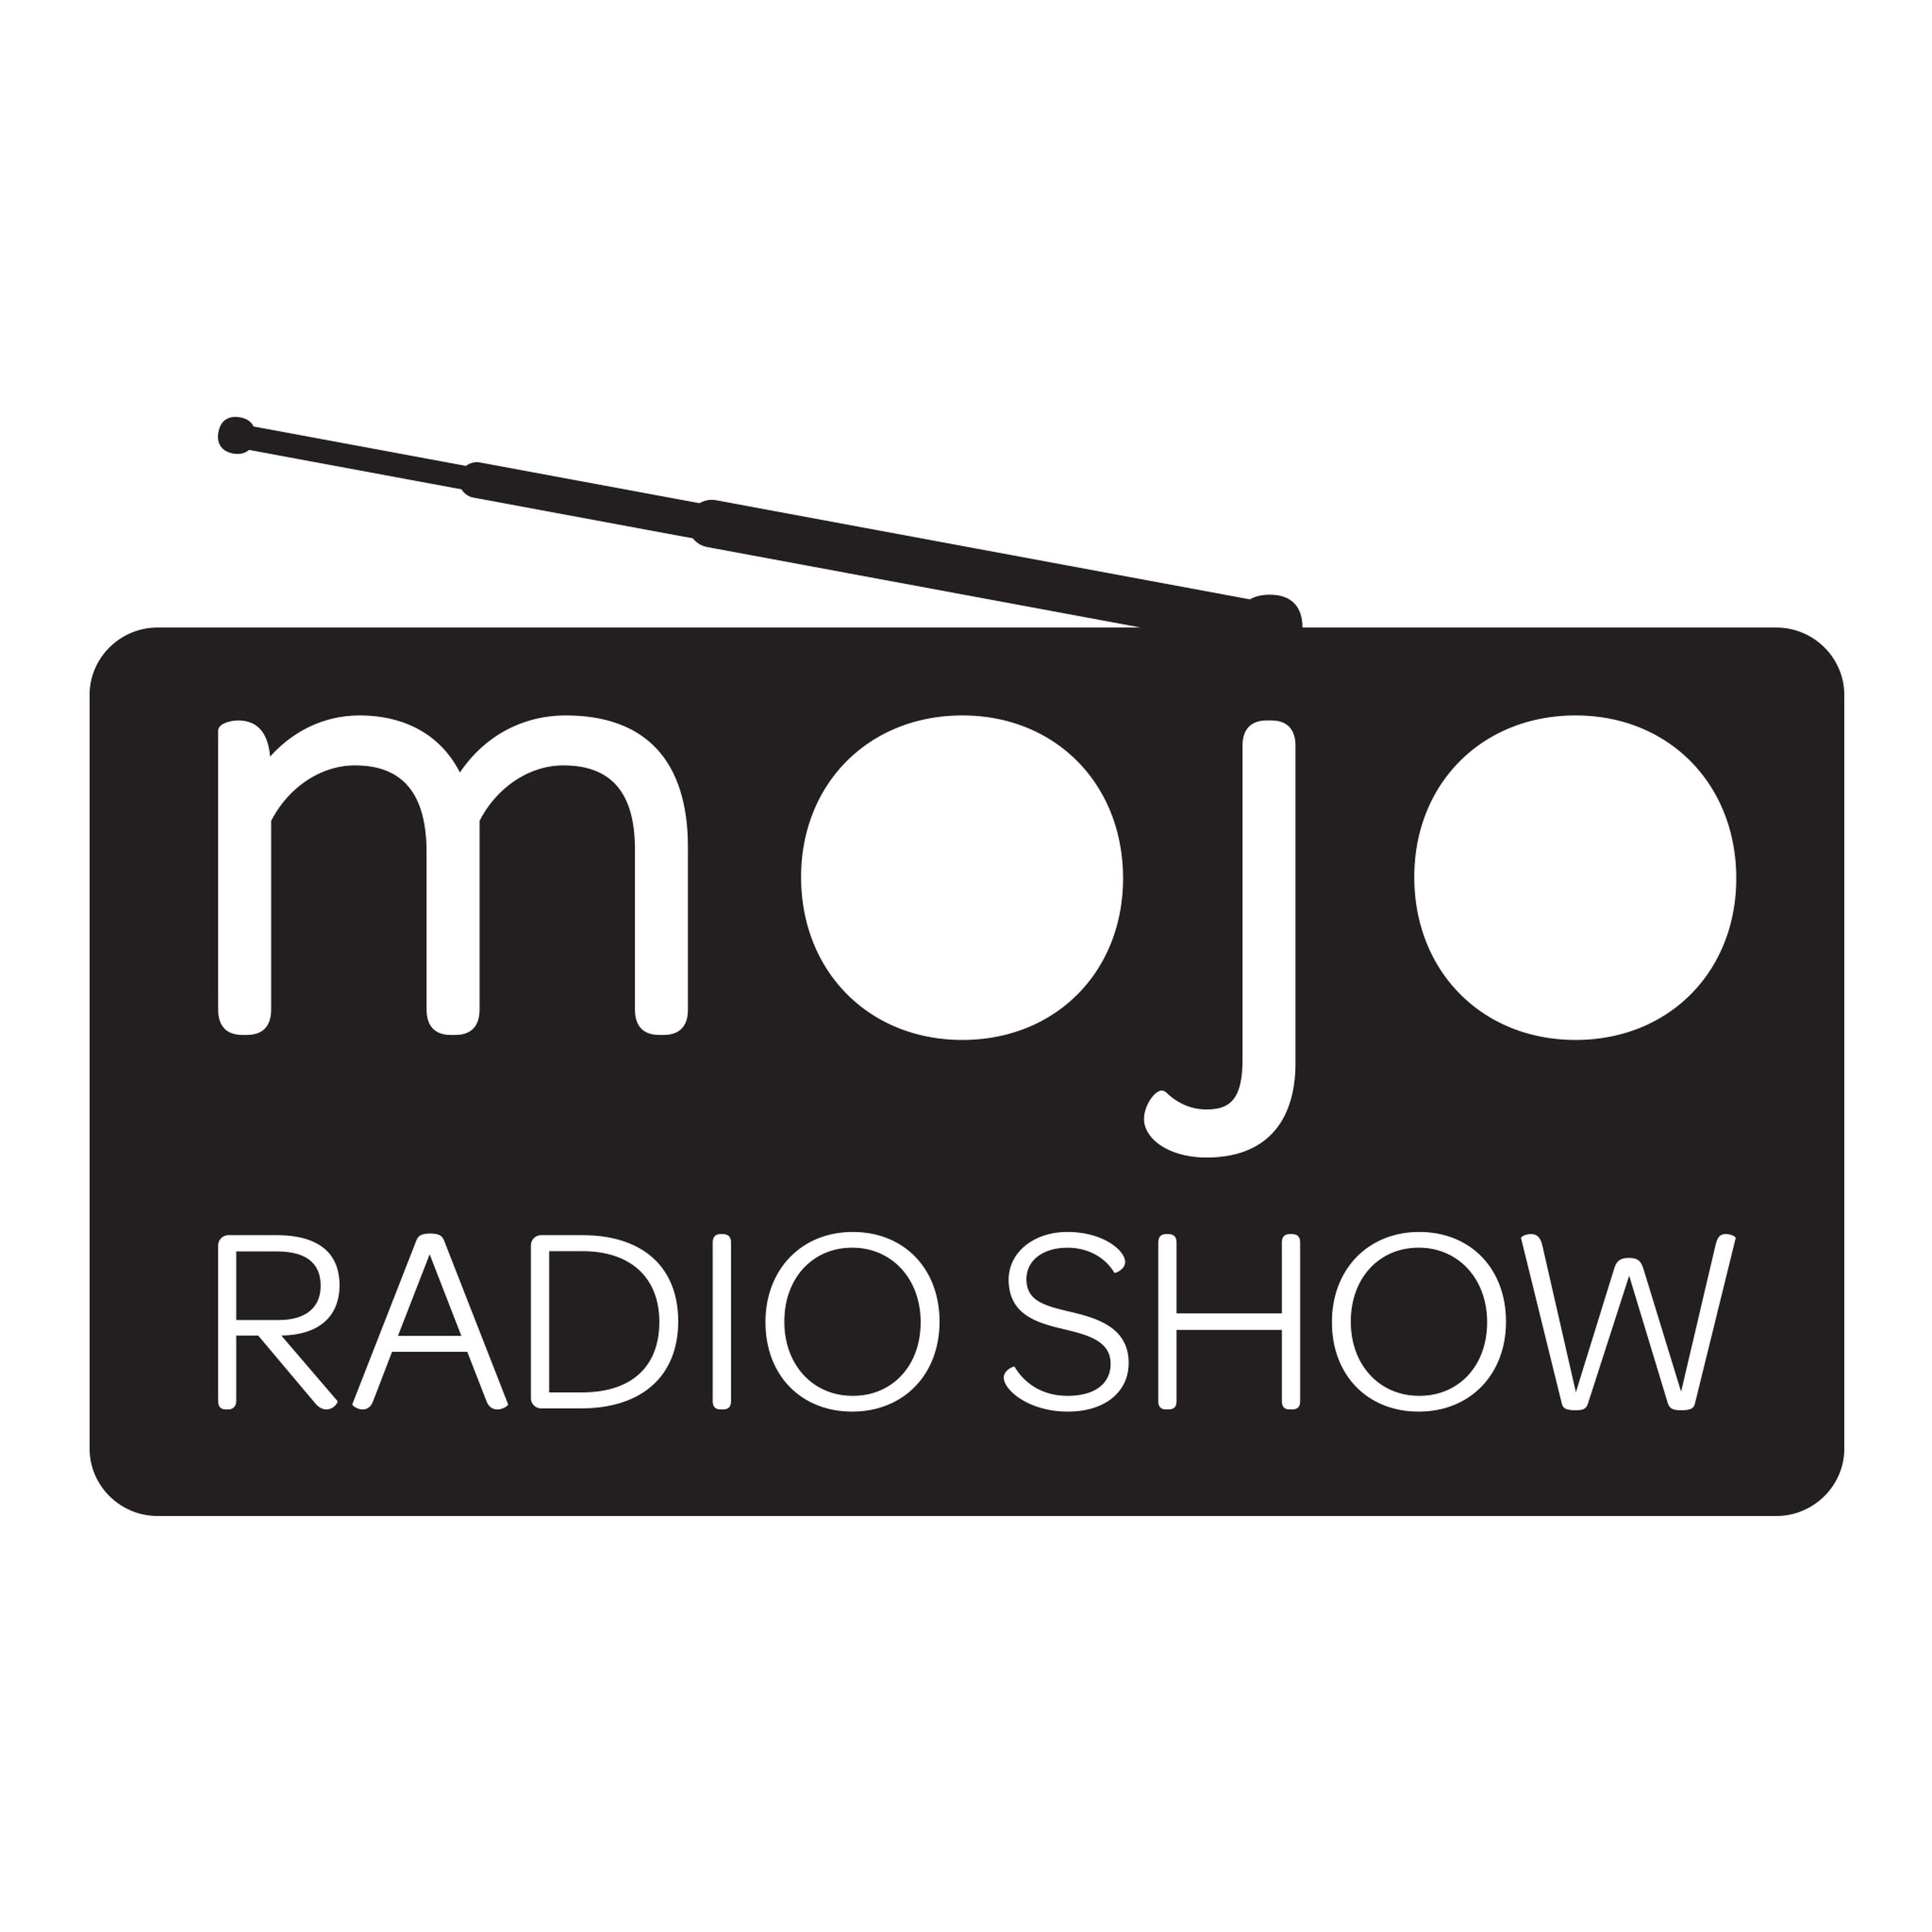 The Mojo Radio Show - Ep 125: Living a True Life of Intention & Purpose - with Minimalist Colin Wright